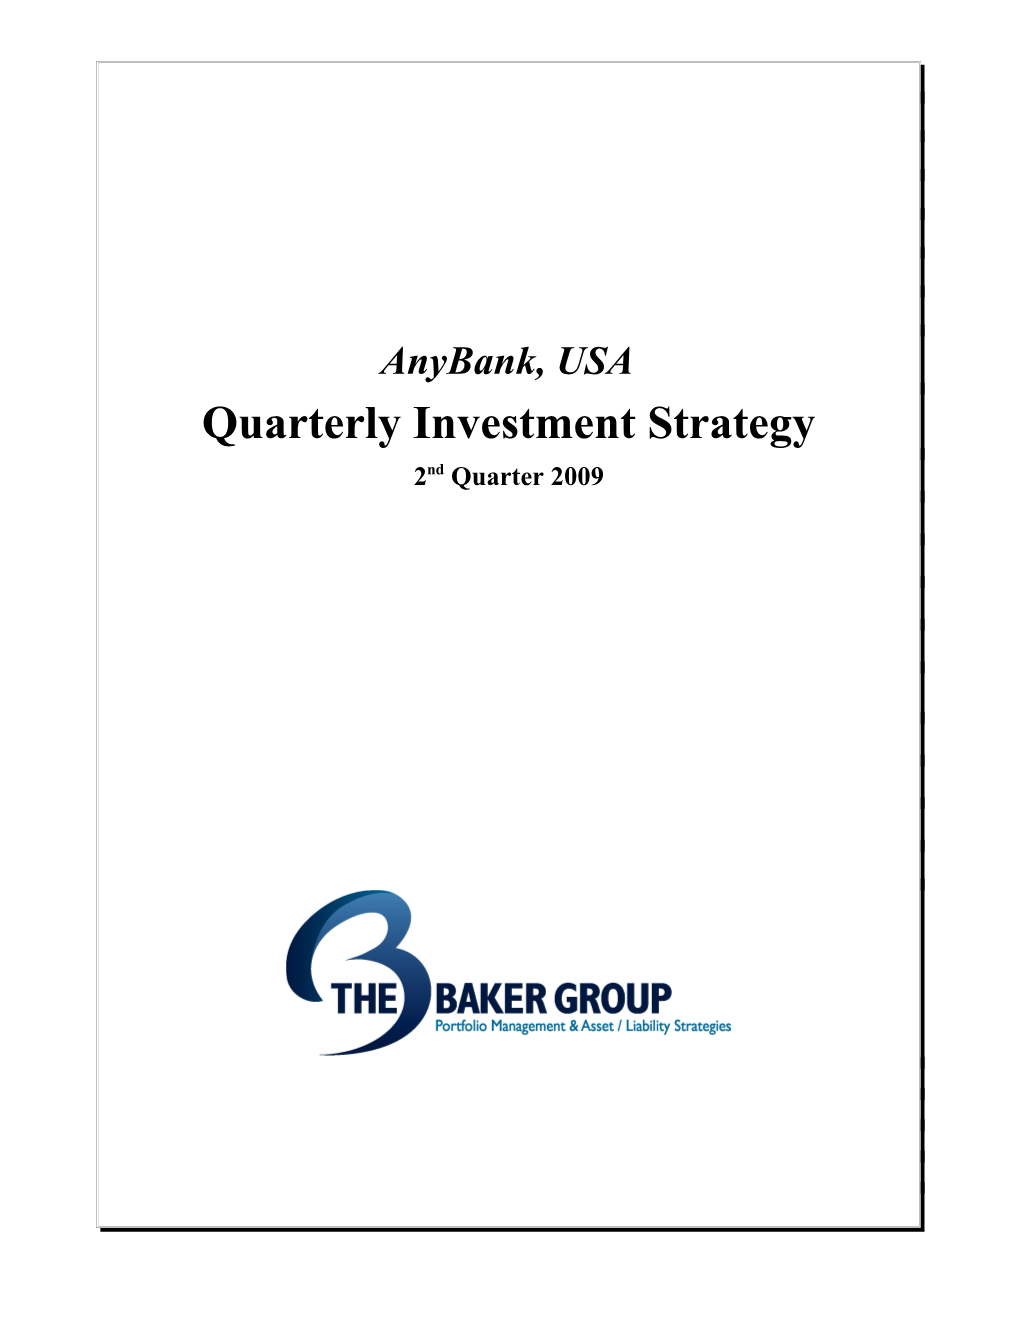 Quarterly Investment Strategy